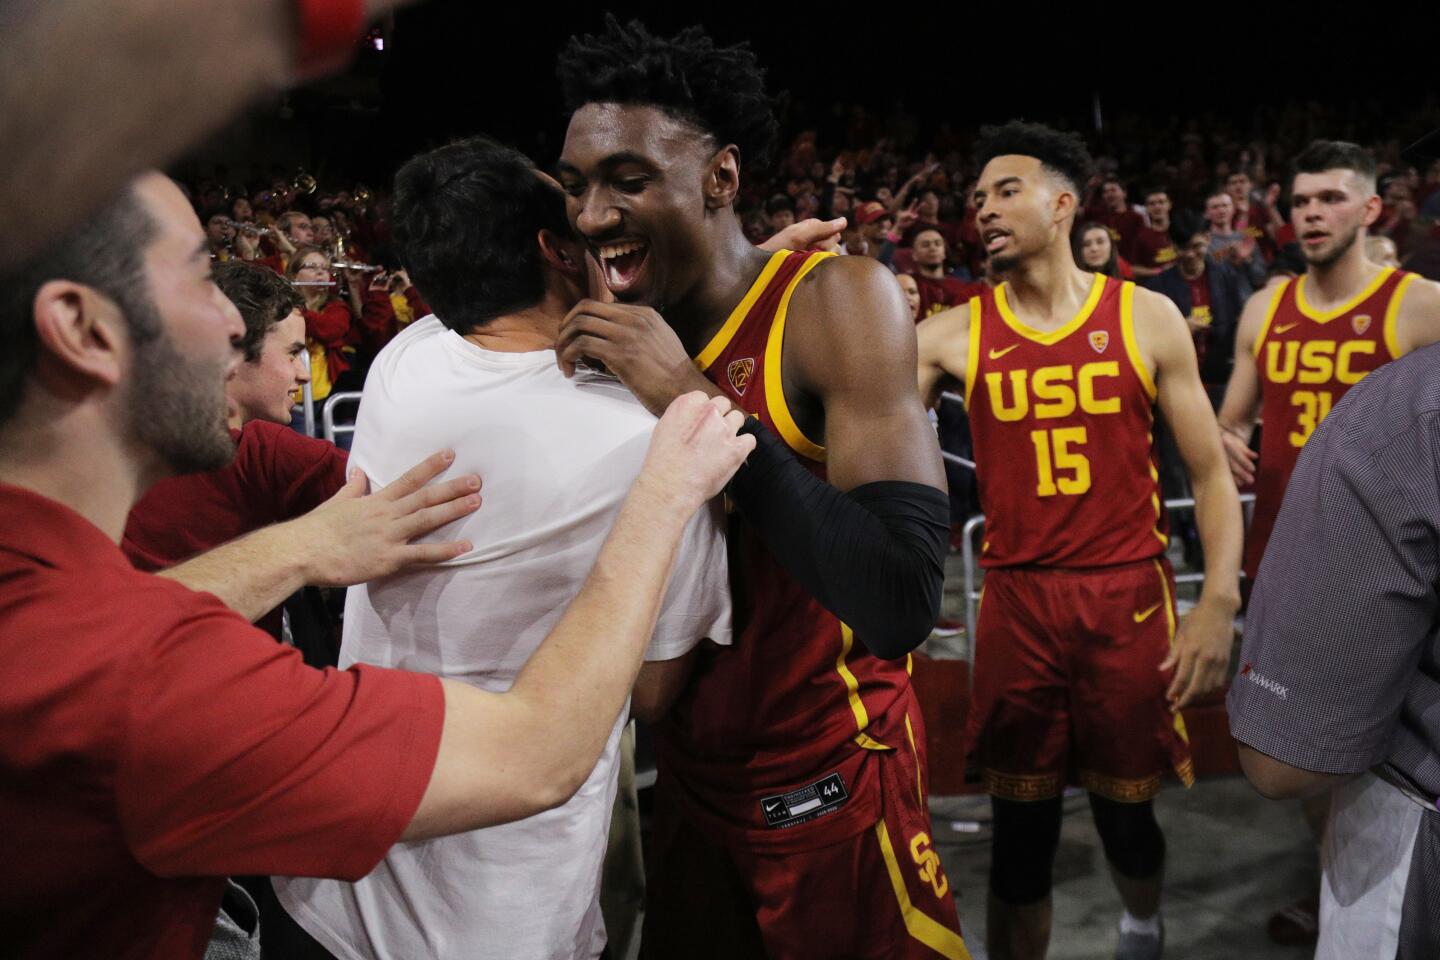 USC guard Jonah Mathews celebrates with fans after scoring the winning basket at the end of the Trojans' 54-52 victory over UCLA at Galen Center on March 7, 2020.